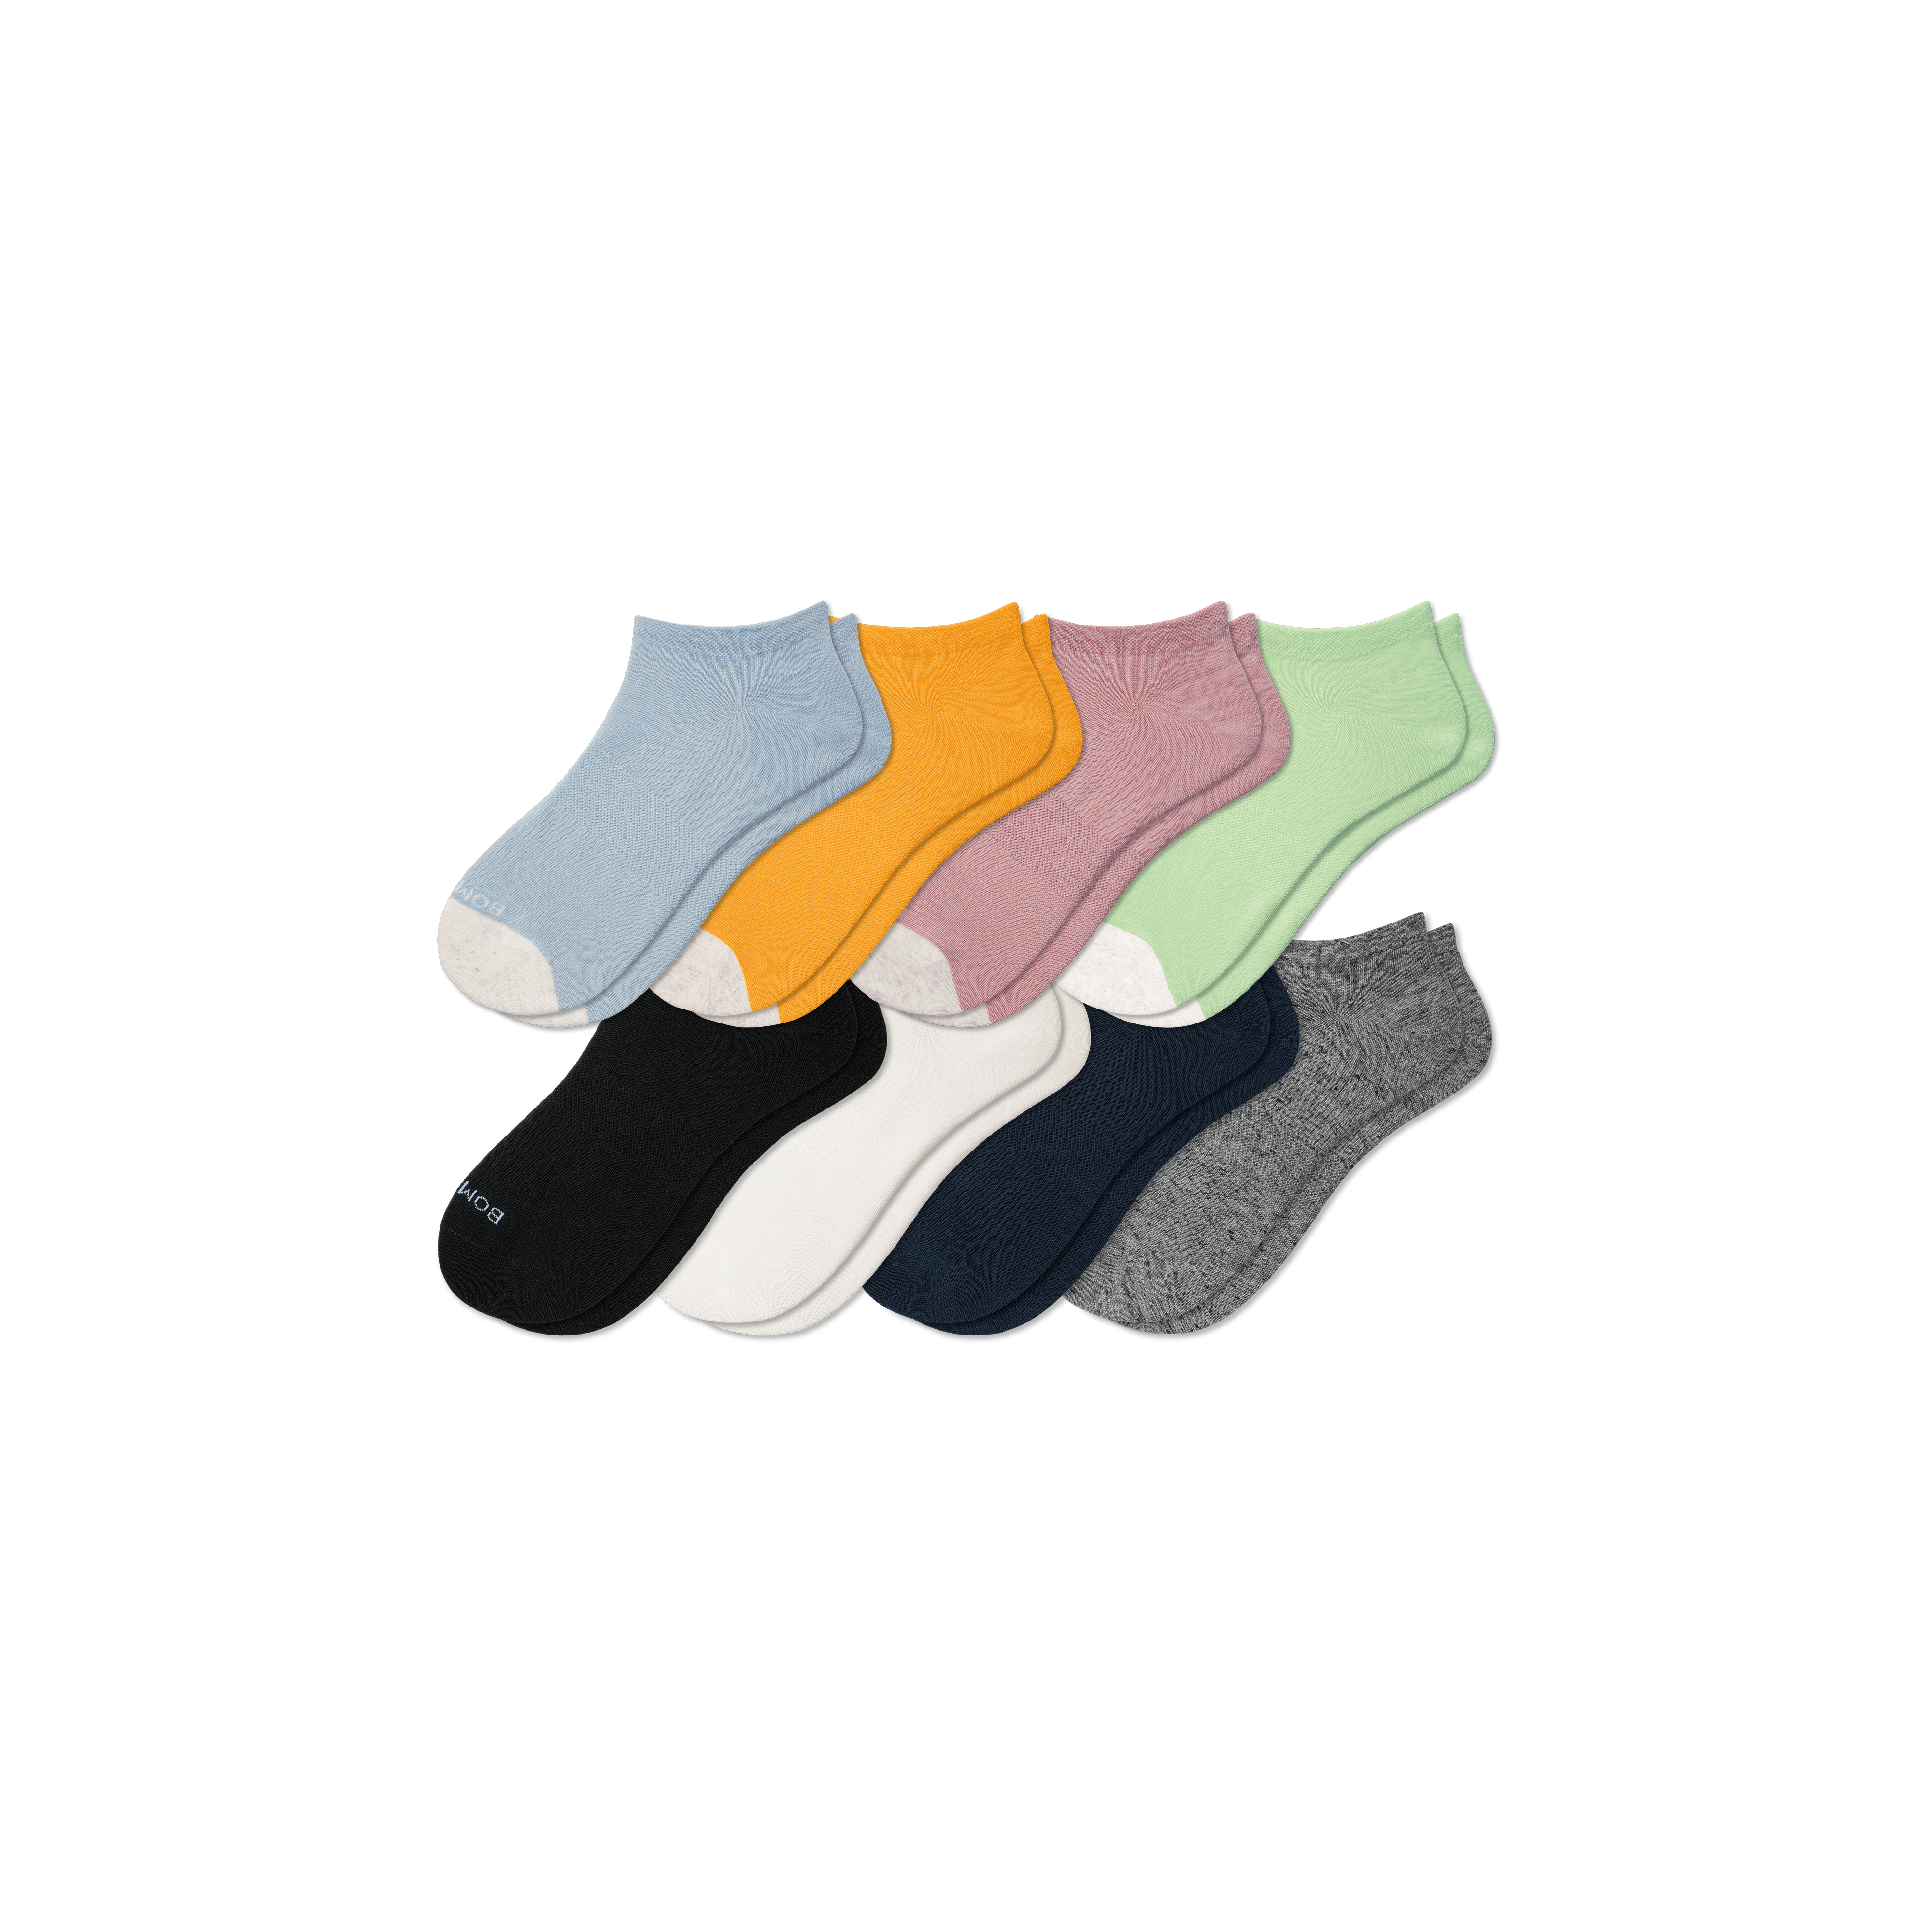 Bombas Lightweight Ankle Sock 8-pack In Spearmint Solids Mix